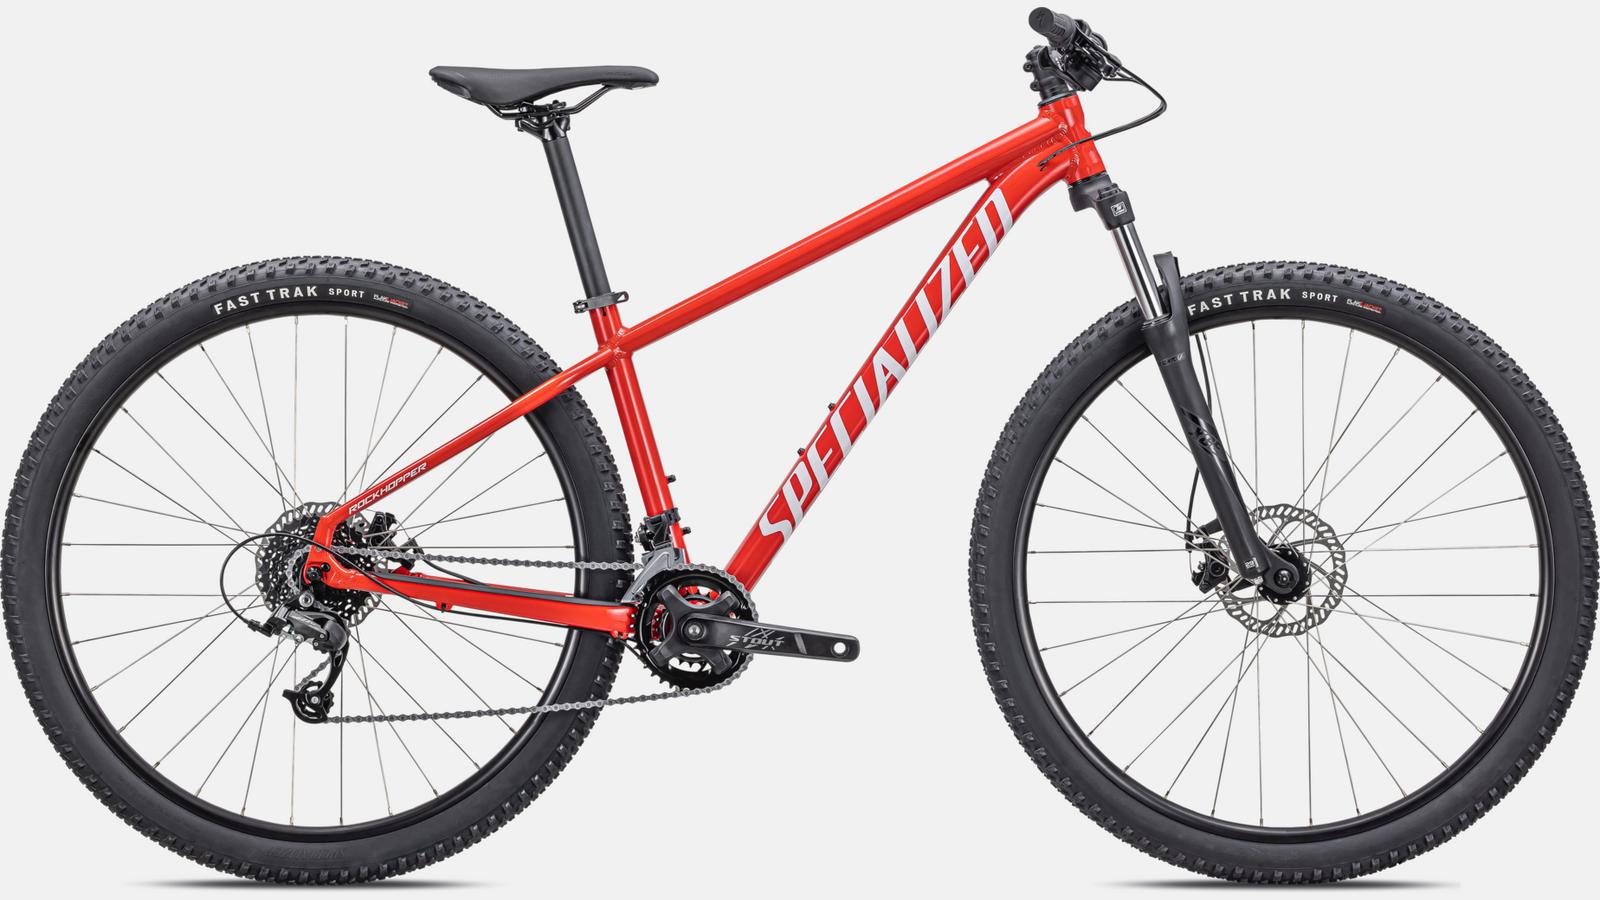 Paint for 2022 Specialized Rockhopper 29 - Gloss Flo Red